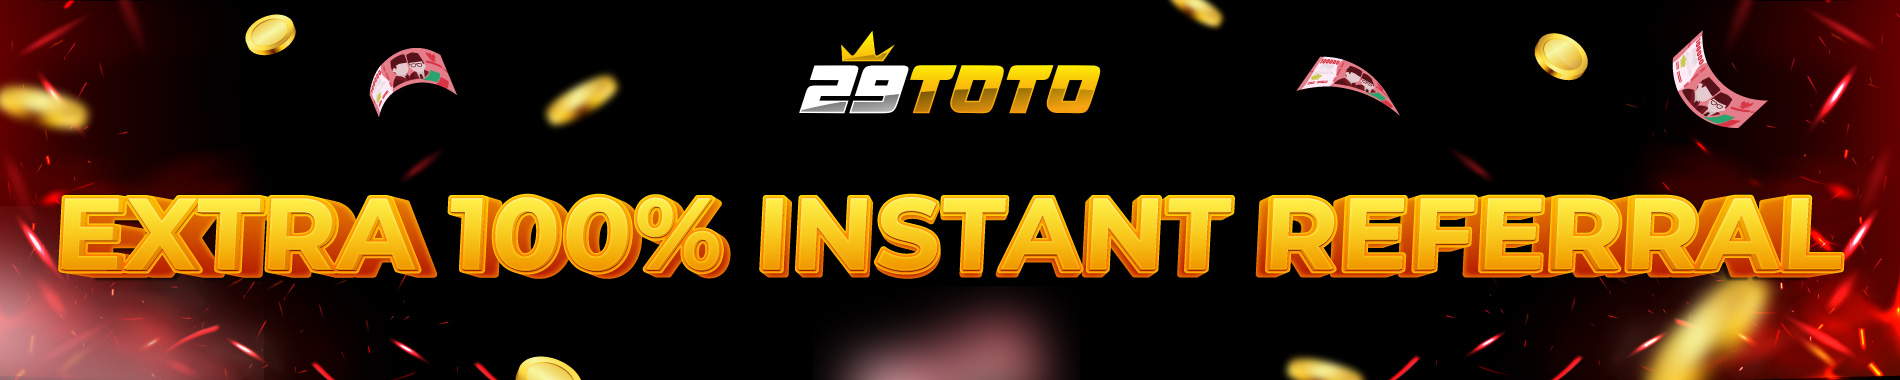 29toto extra instant referral 100 persen free